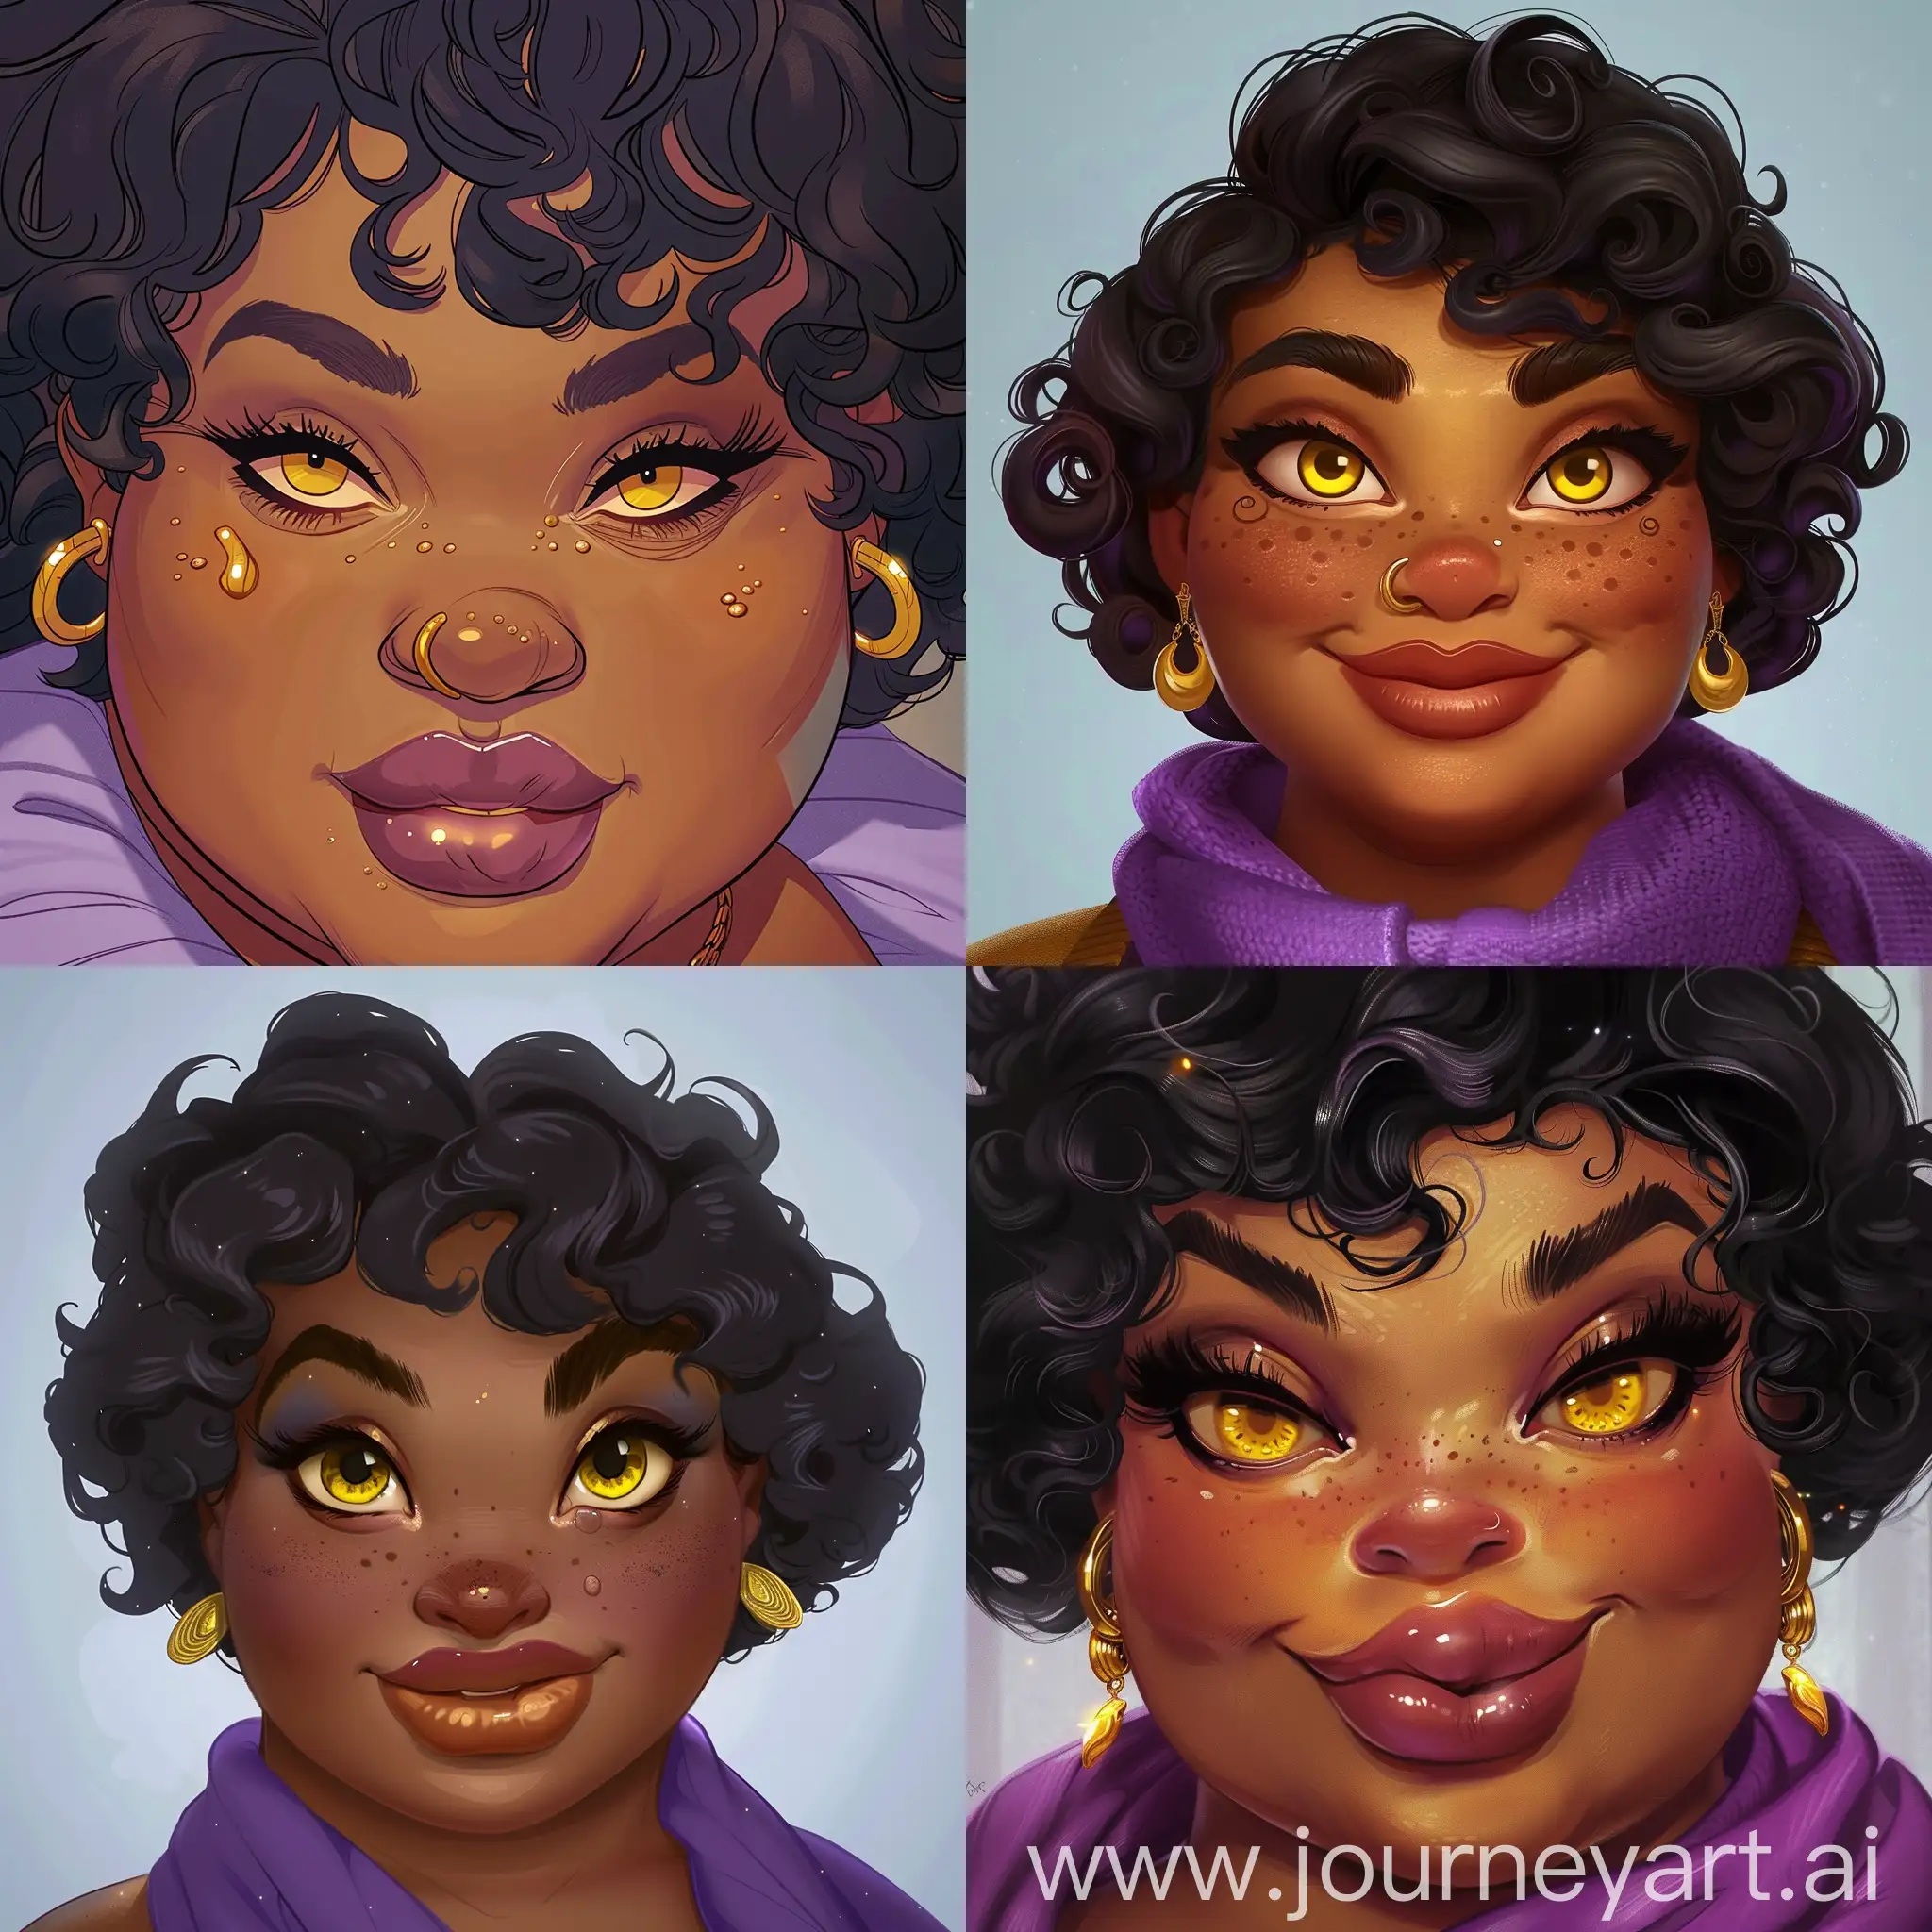   a fat, black woman, short curly hair, yellow eyes, she has gold earrings and a mole on the right side of her cheek, her nose is rounded and her lips are big, she is a purple scarf in 90s Disney cartoon 